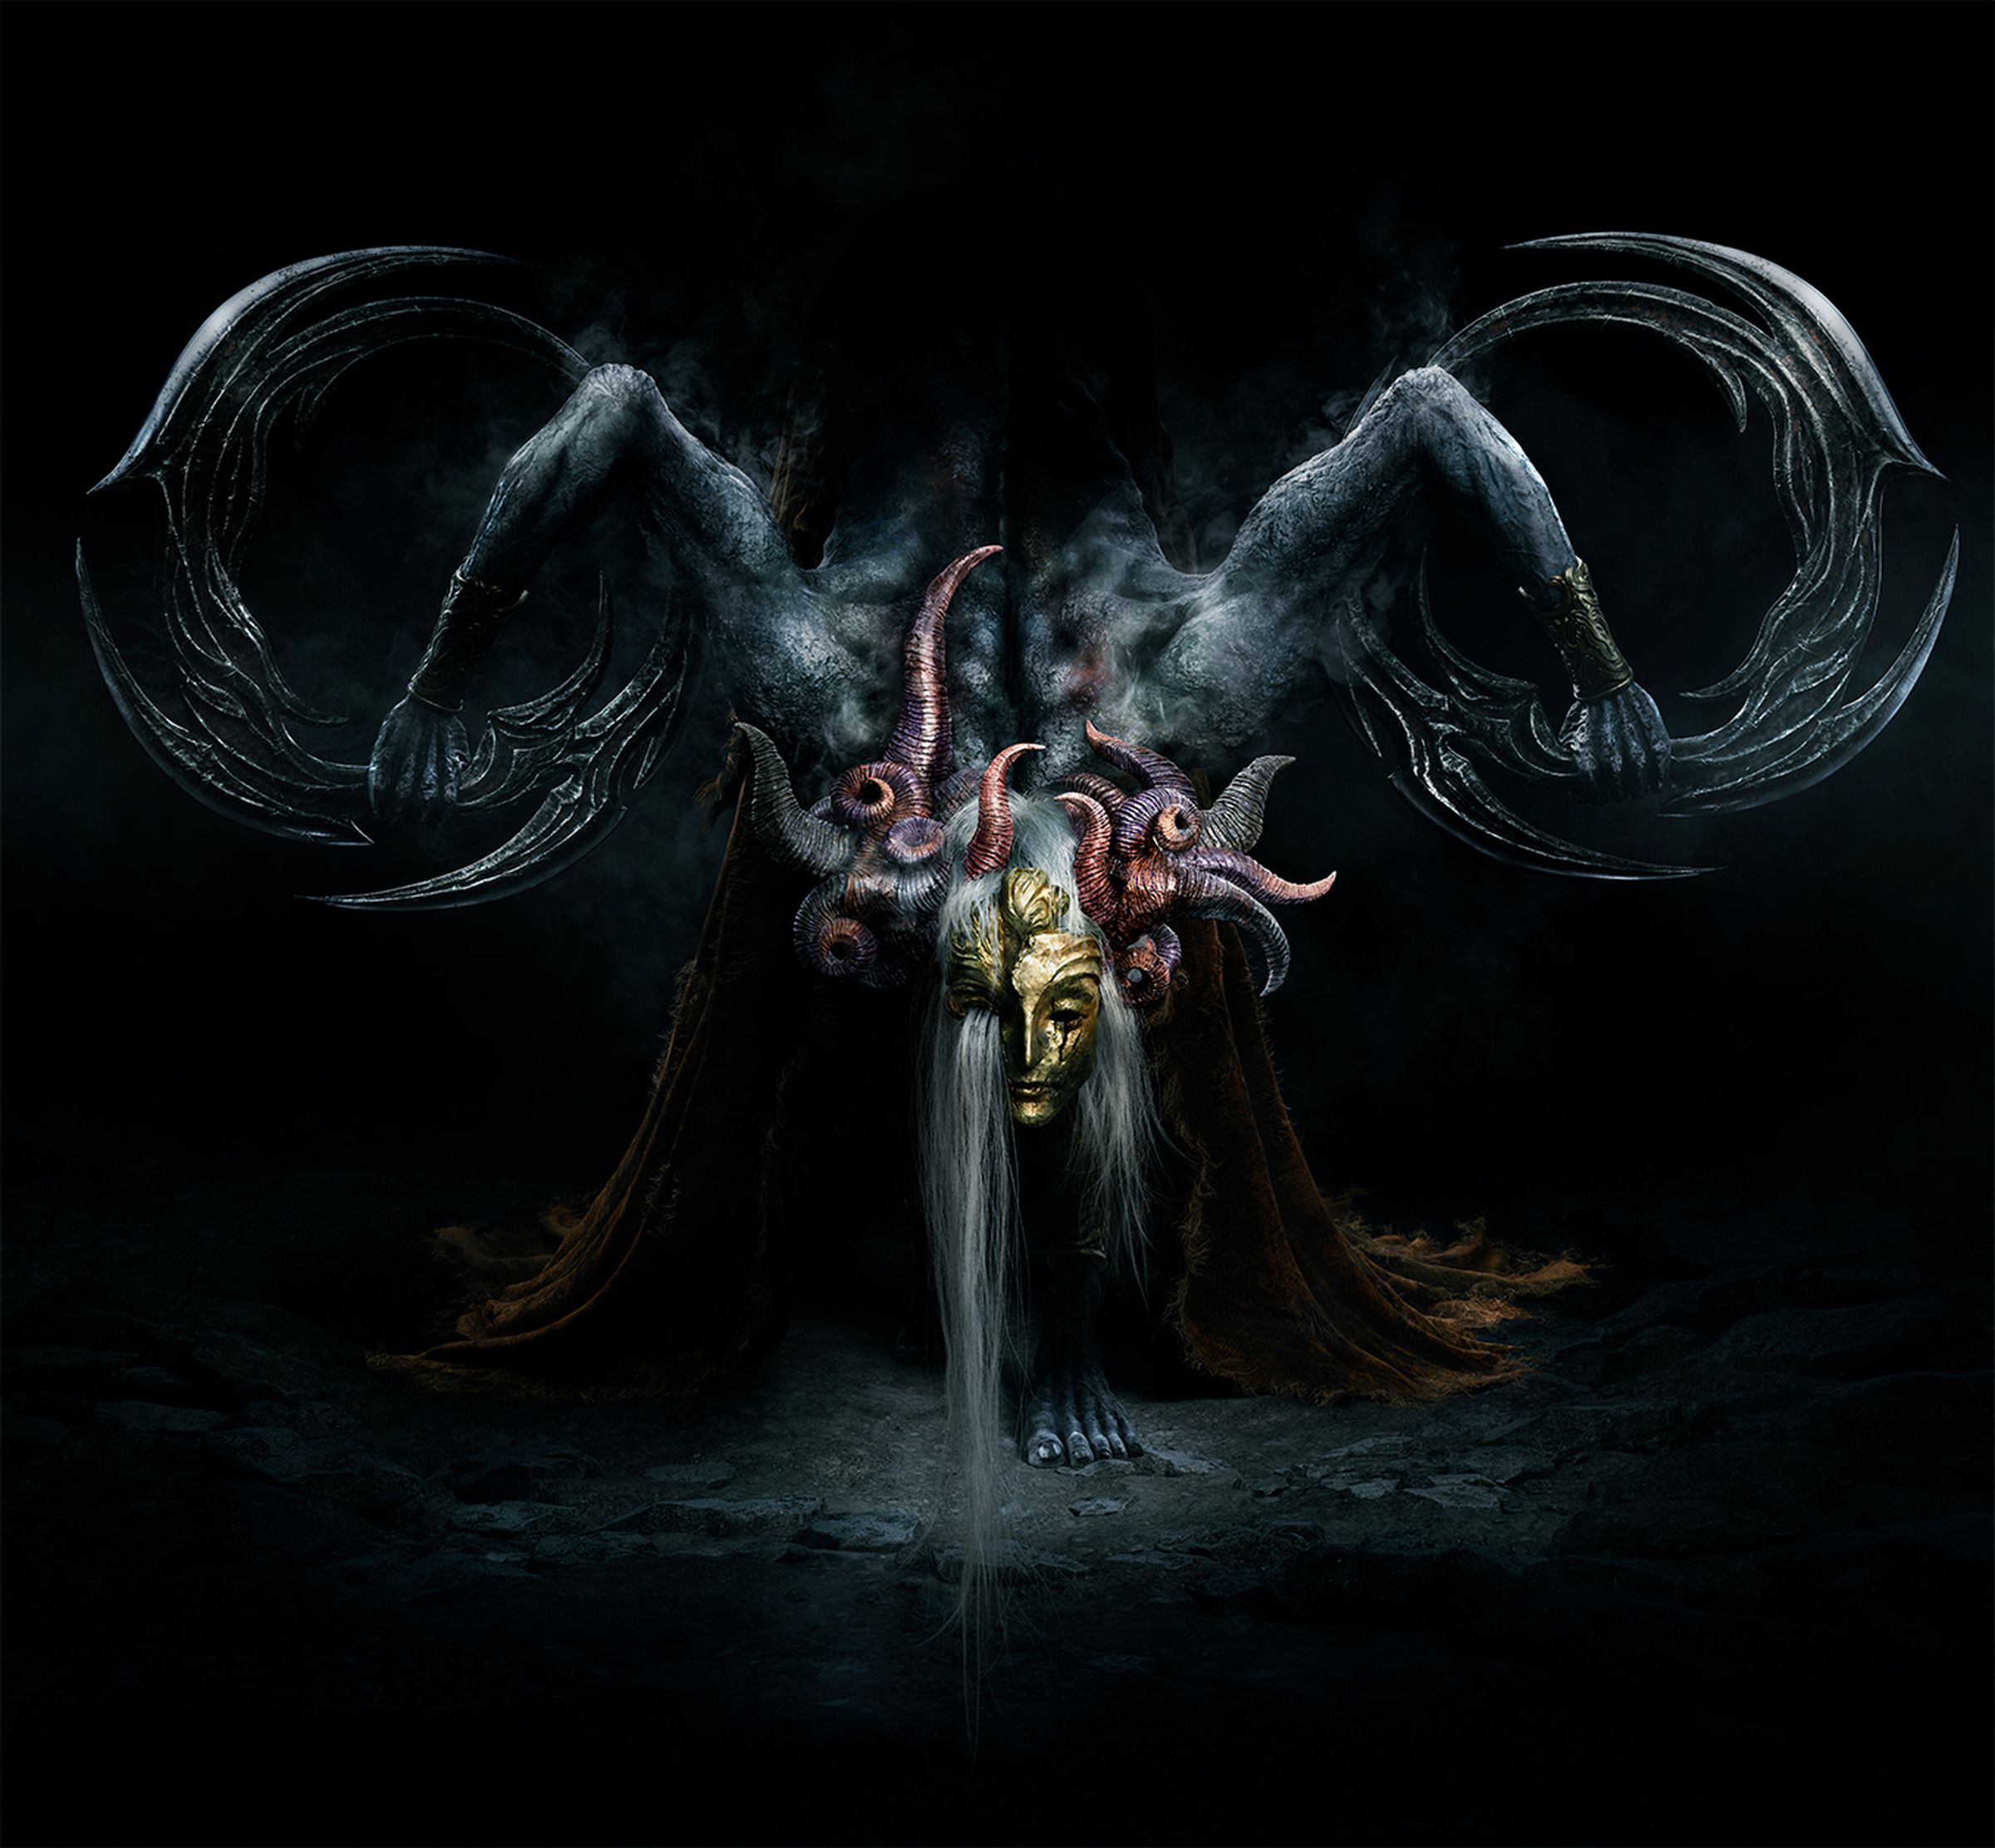 Image of a monster from Shadow of the Erdtree featuring a feminine looking monster in a gold mask wielding circular blades hunched in a position to resemble a uterus.